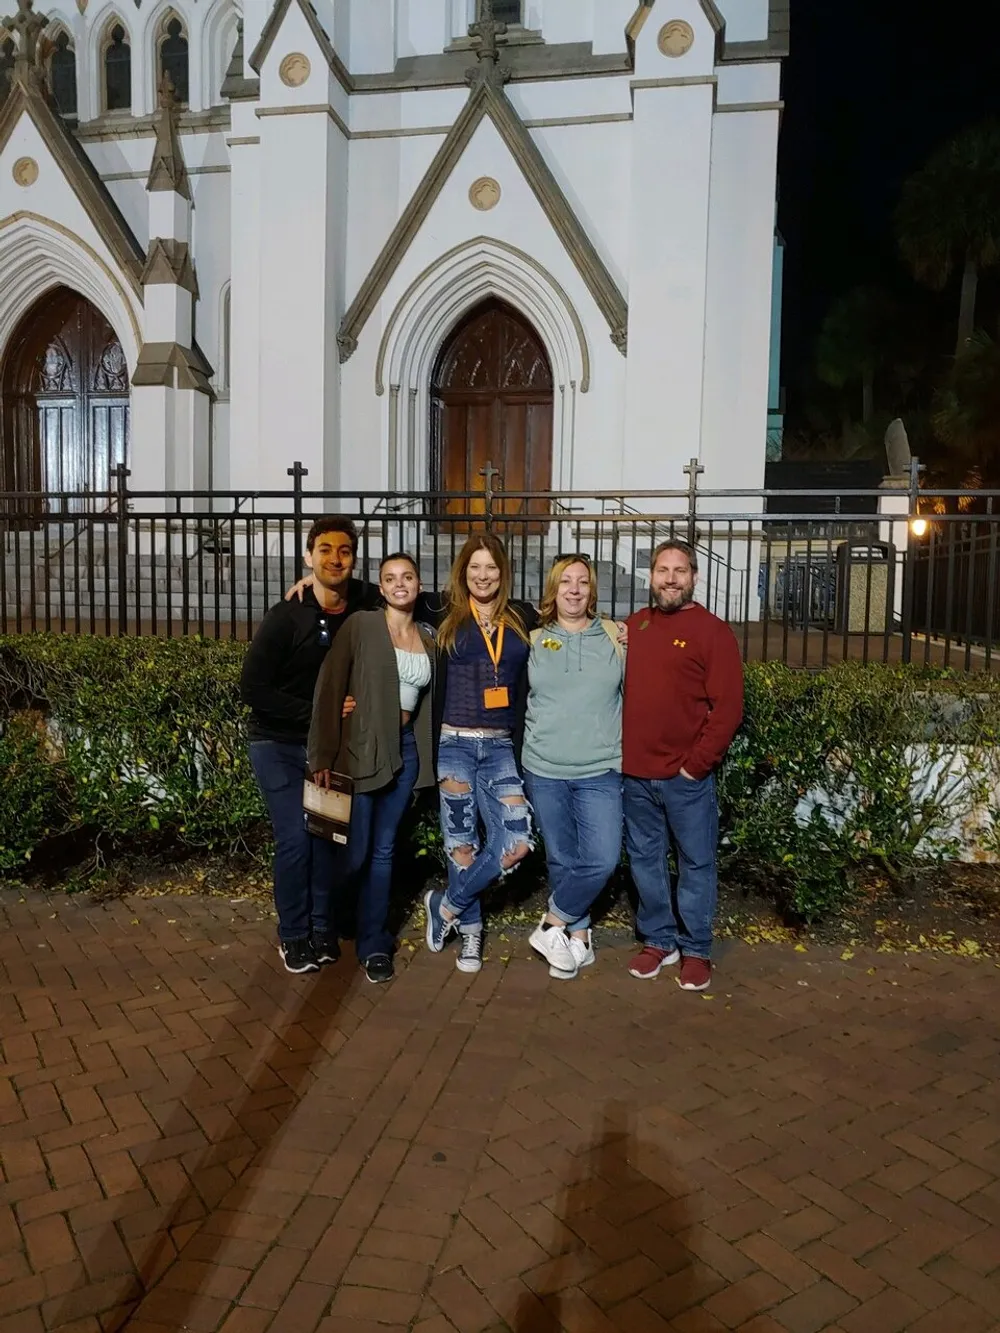 Five individuals are posing for a photo at night in front of a church with gothic architectural features